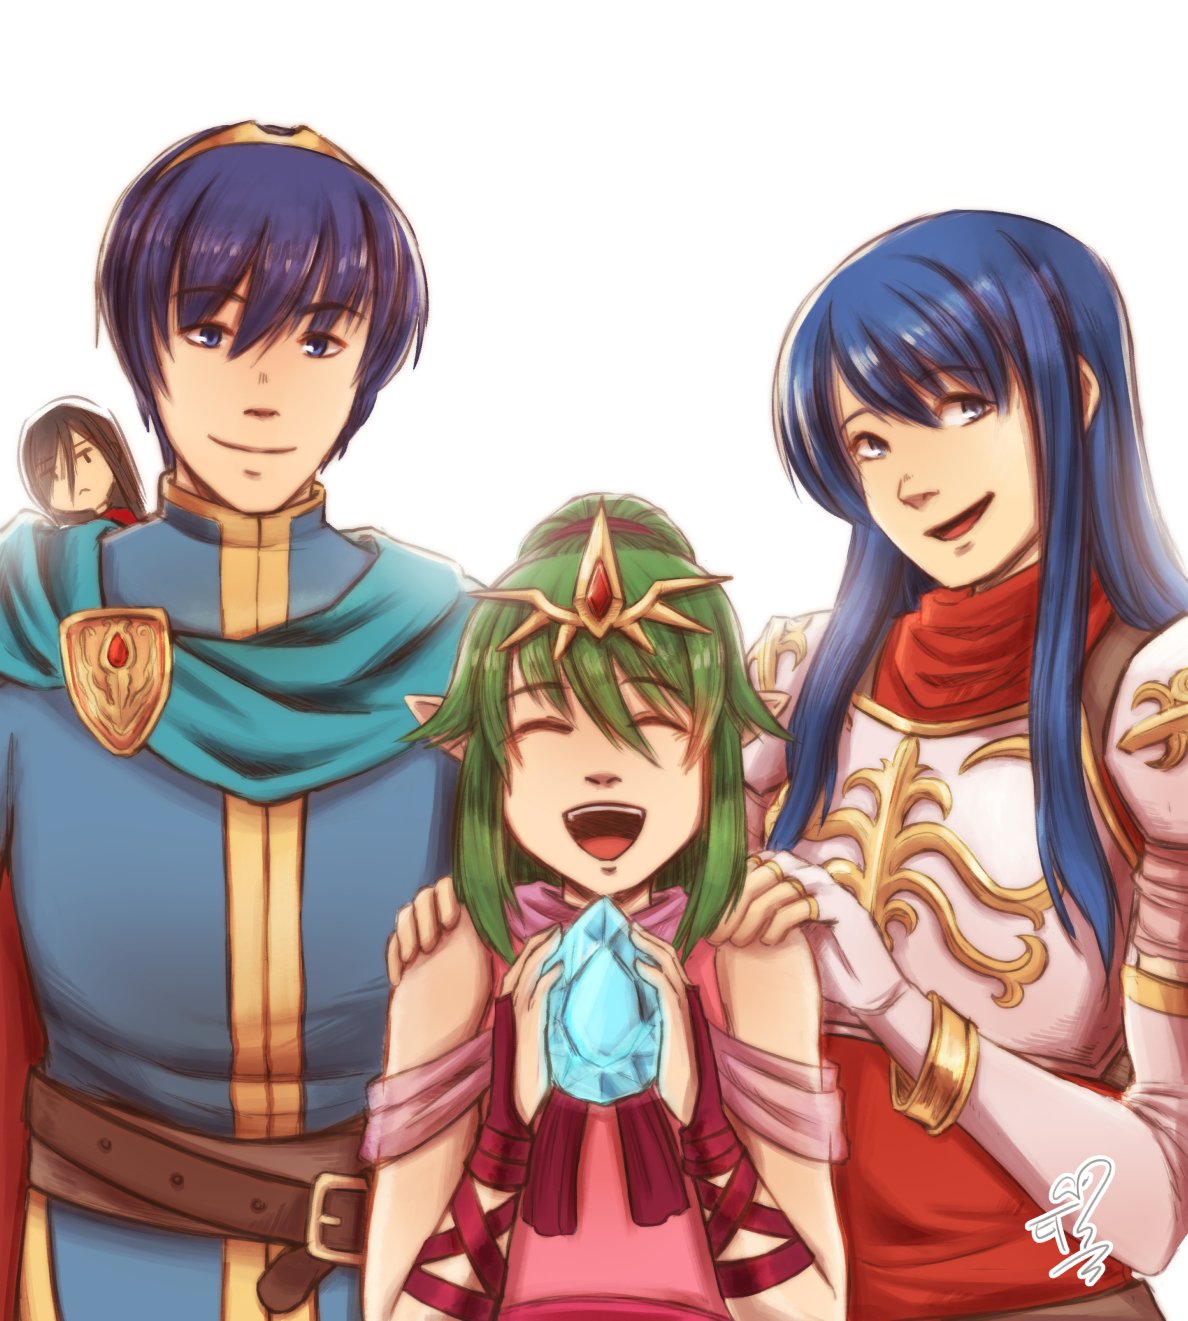 2boys 2girls blue_eyes chiki family fire_emblem fire_emblem:_mystery_of_the_emblem fire_emblem_heroes fire_emblem_musou gloves green_eyes green_hair highres intelligent_systems long_hair looking_at_viewer marth multiple_boys multiple_girls nabarl nintendo open_mouth ponytail sheeda